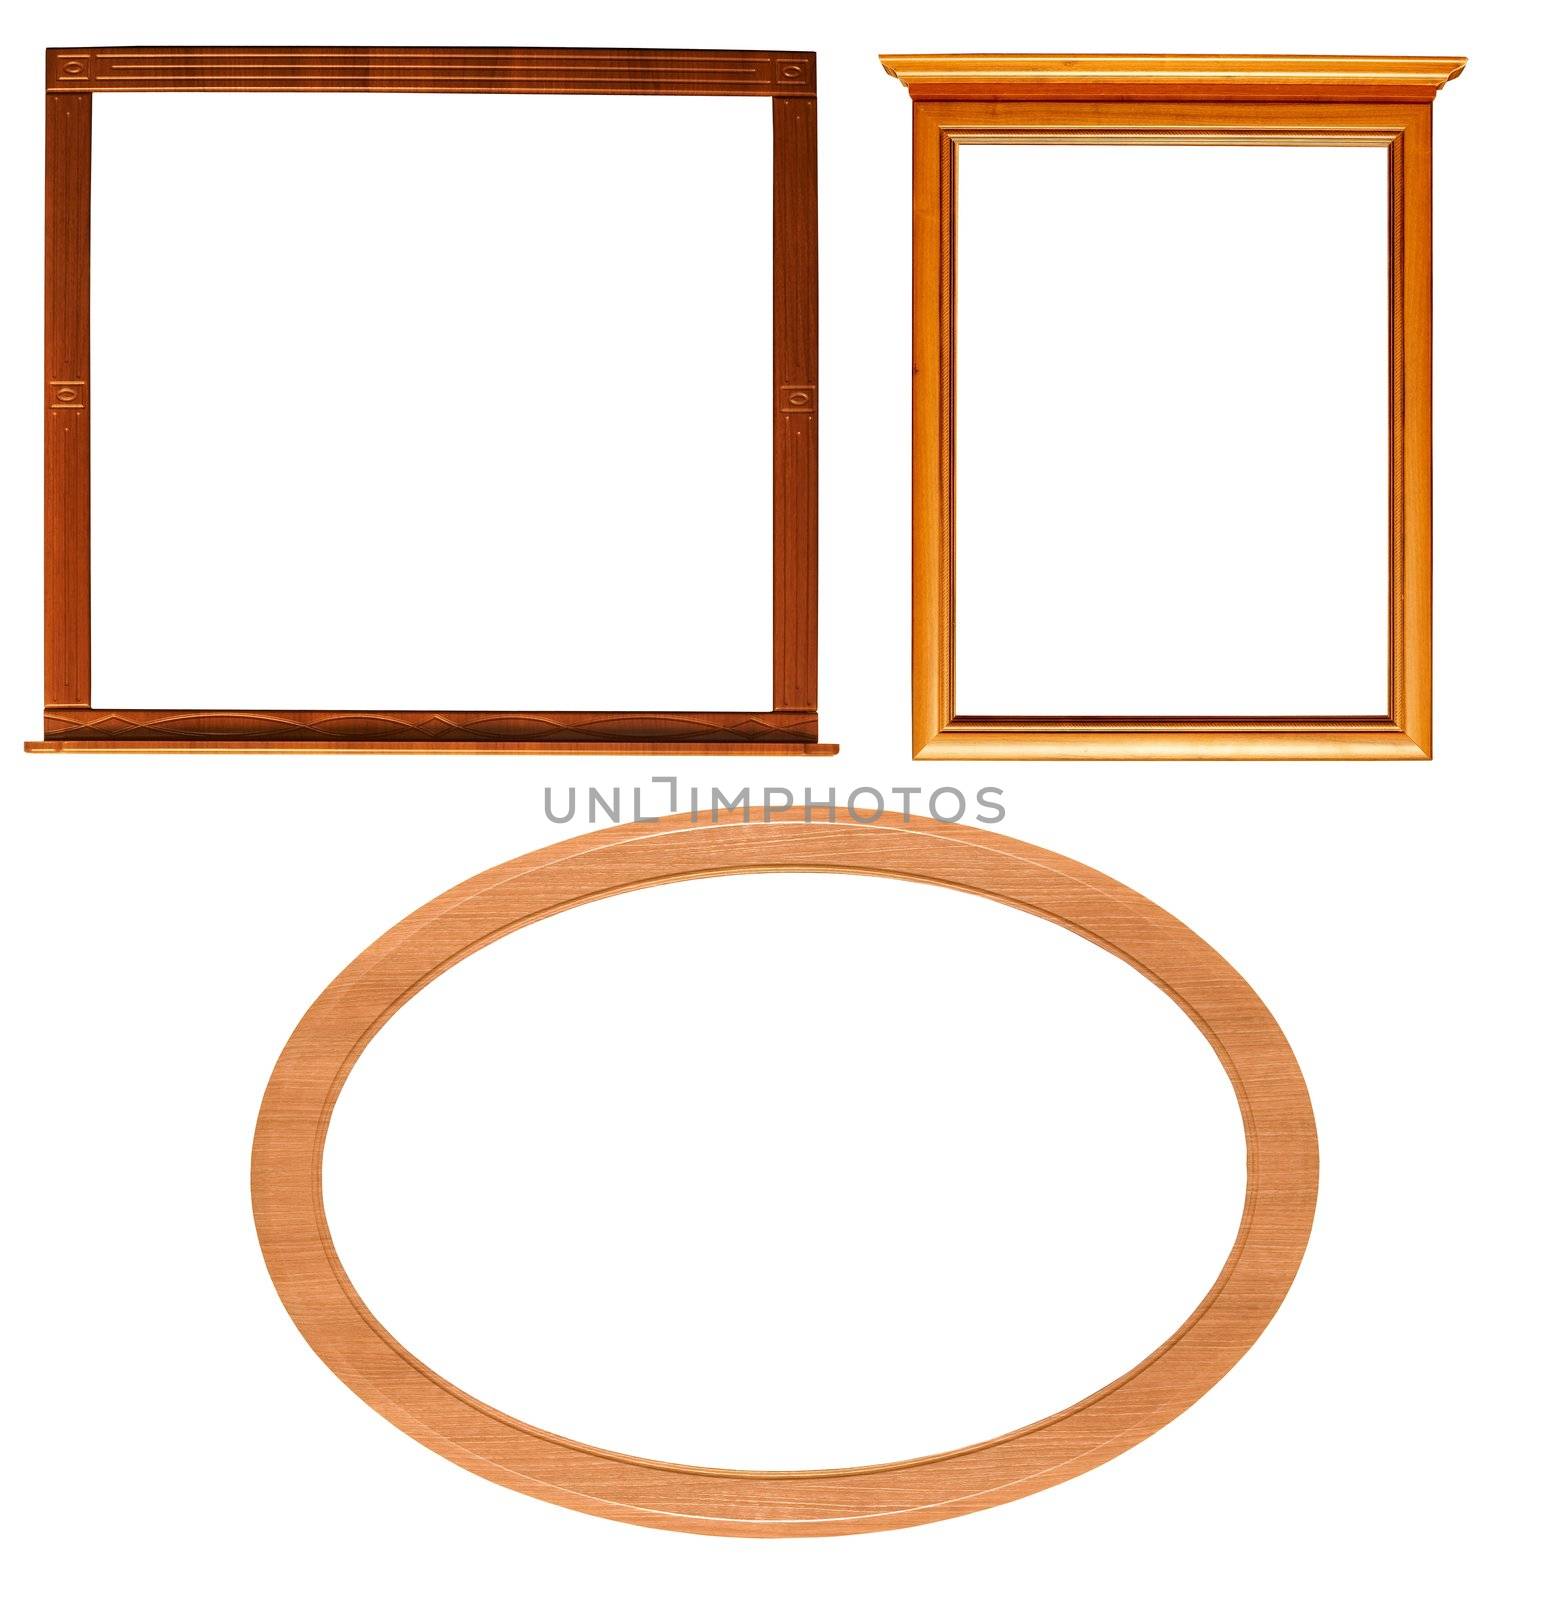 An image of three wooden frames